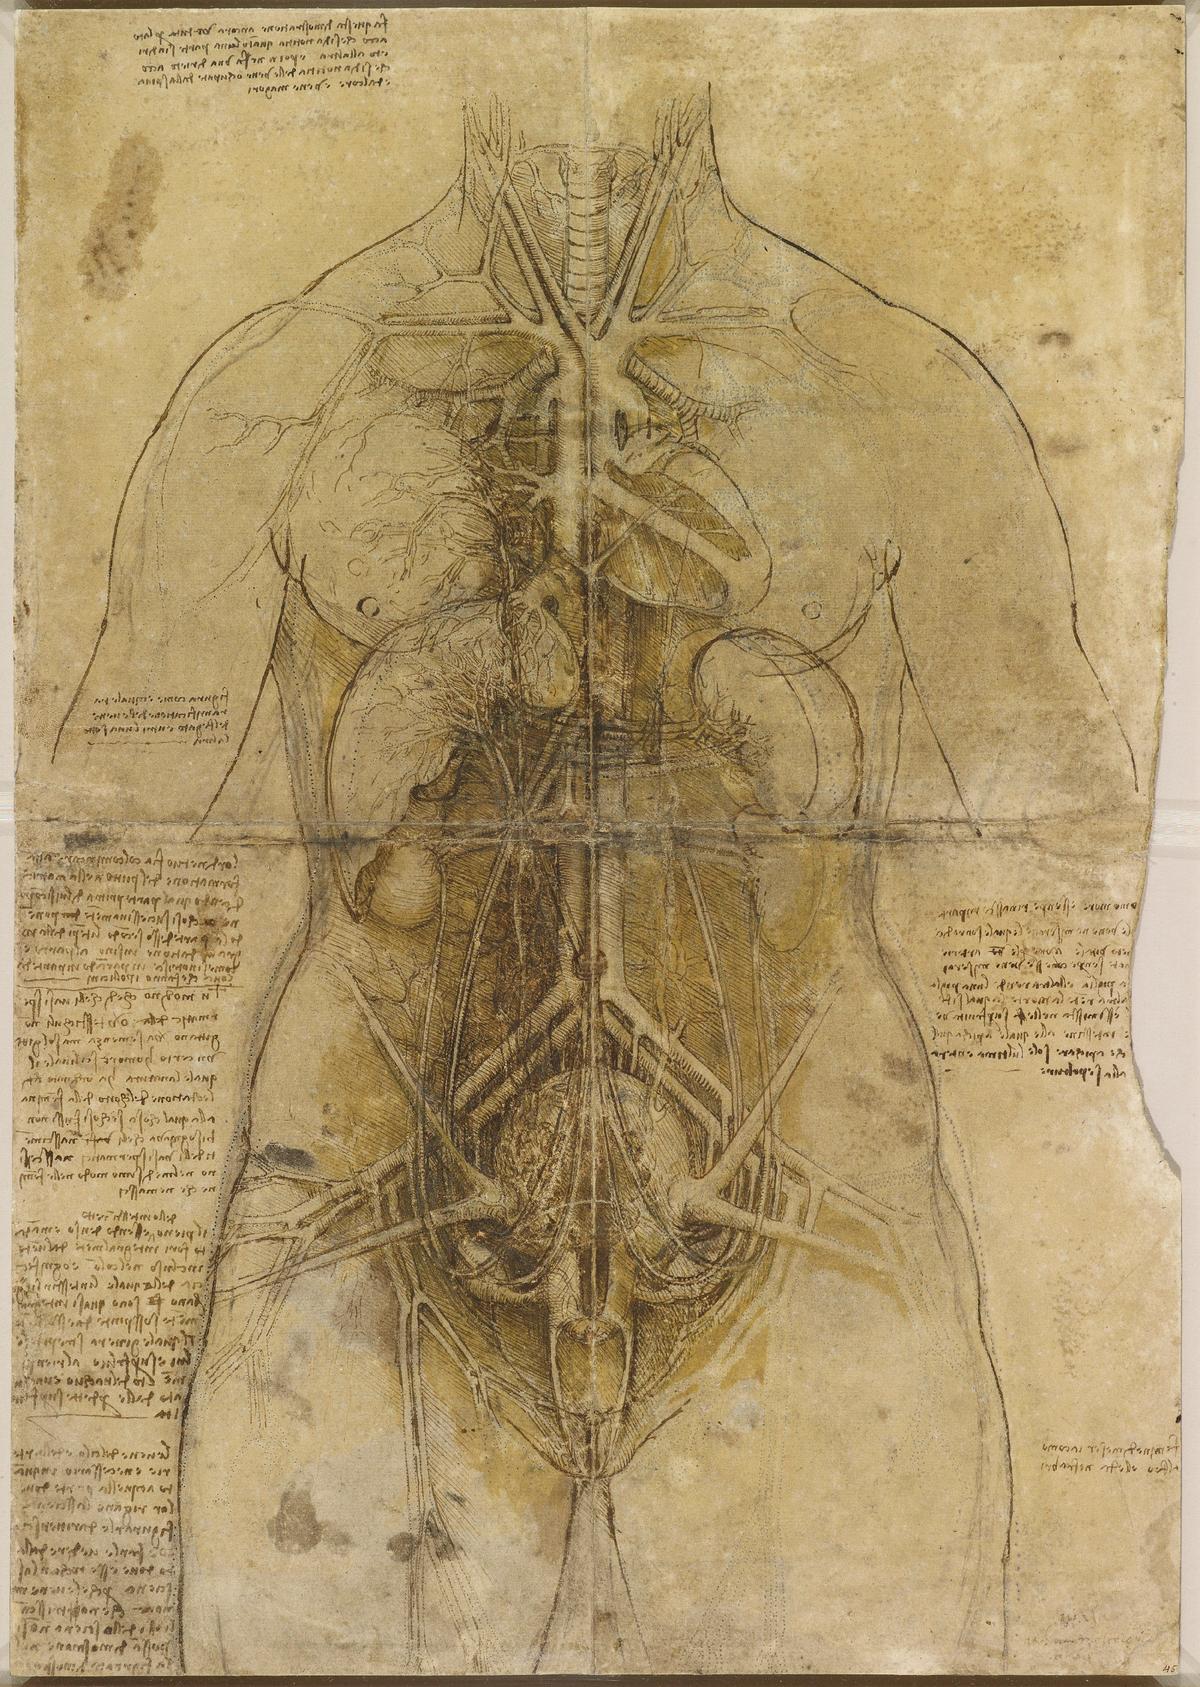 Leonardo da Vinci's The Cardiovascular System and Principal Organs of a Woman (around 1509-10) carries two fingerprints from the master artist; the thumb mark can be found beside the left side, by the arm of his subject Courtesy of the Royal Collection Trust; © Her Majesty Queen Elizabeth II 2019